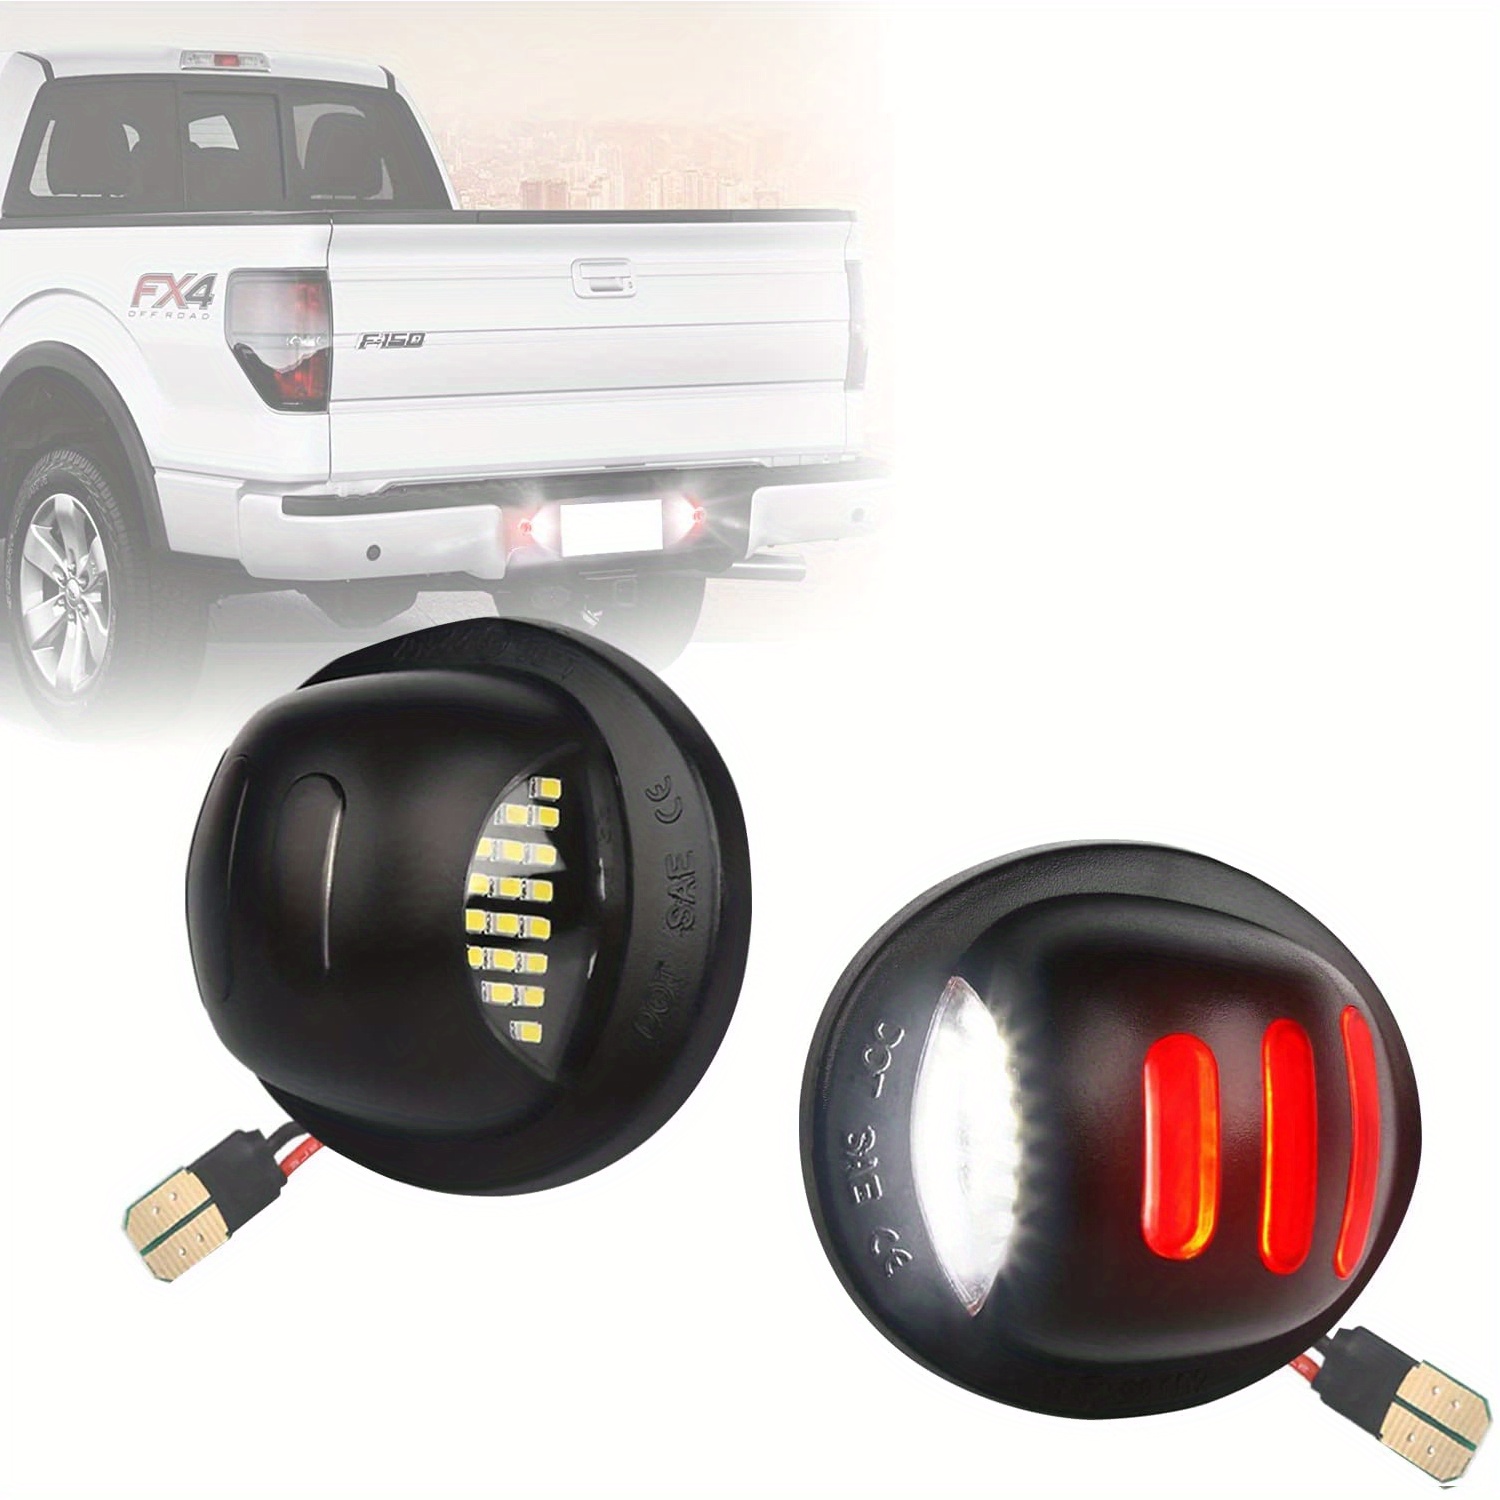 2PCS Auto Car LED License Plate Light For Ford F150 F550 F450 F250 Ranger  Lincoln Heritage Expedition Explorer Tail Number Light